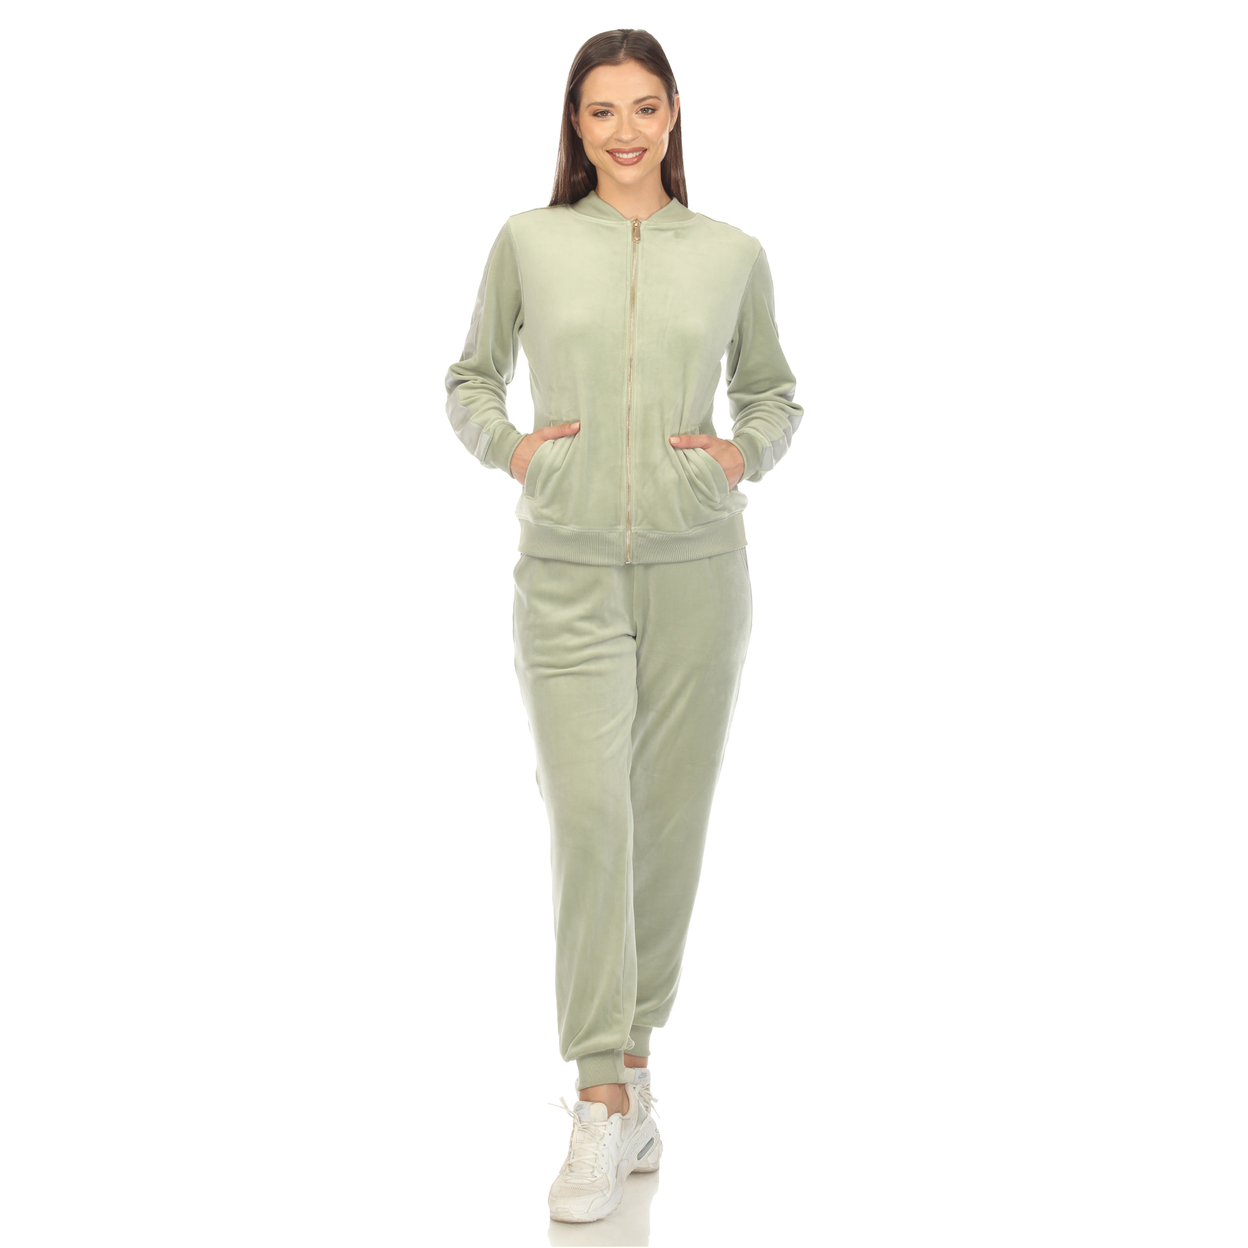 White Mark Women's 2-Piece Velour Tracksuit Set With Faux Leather Stripe - Sage, Large